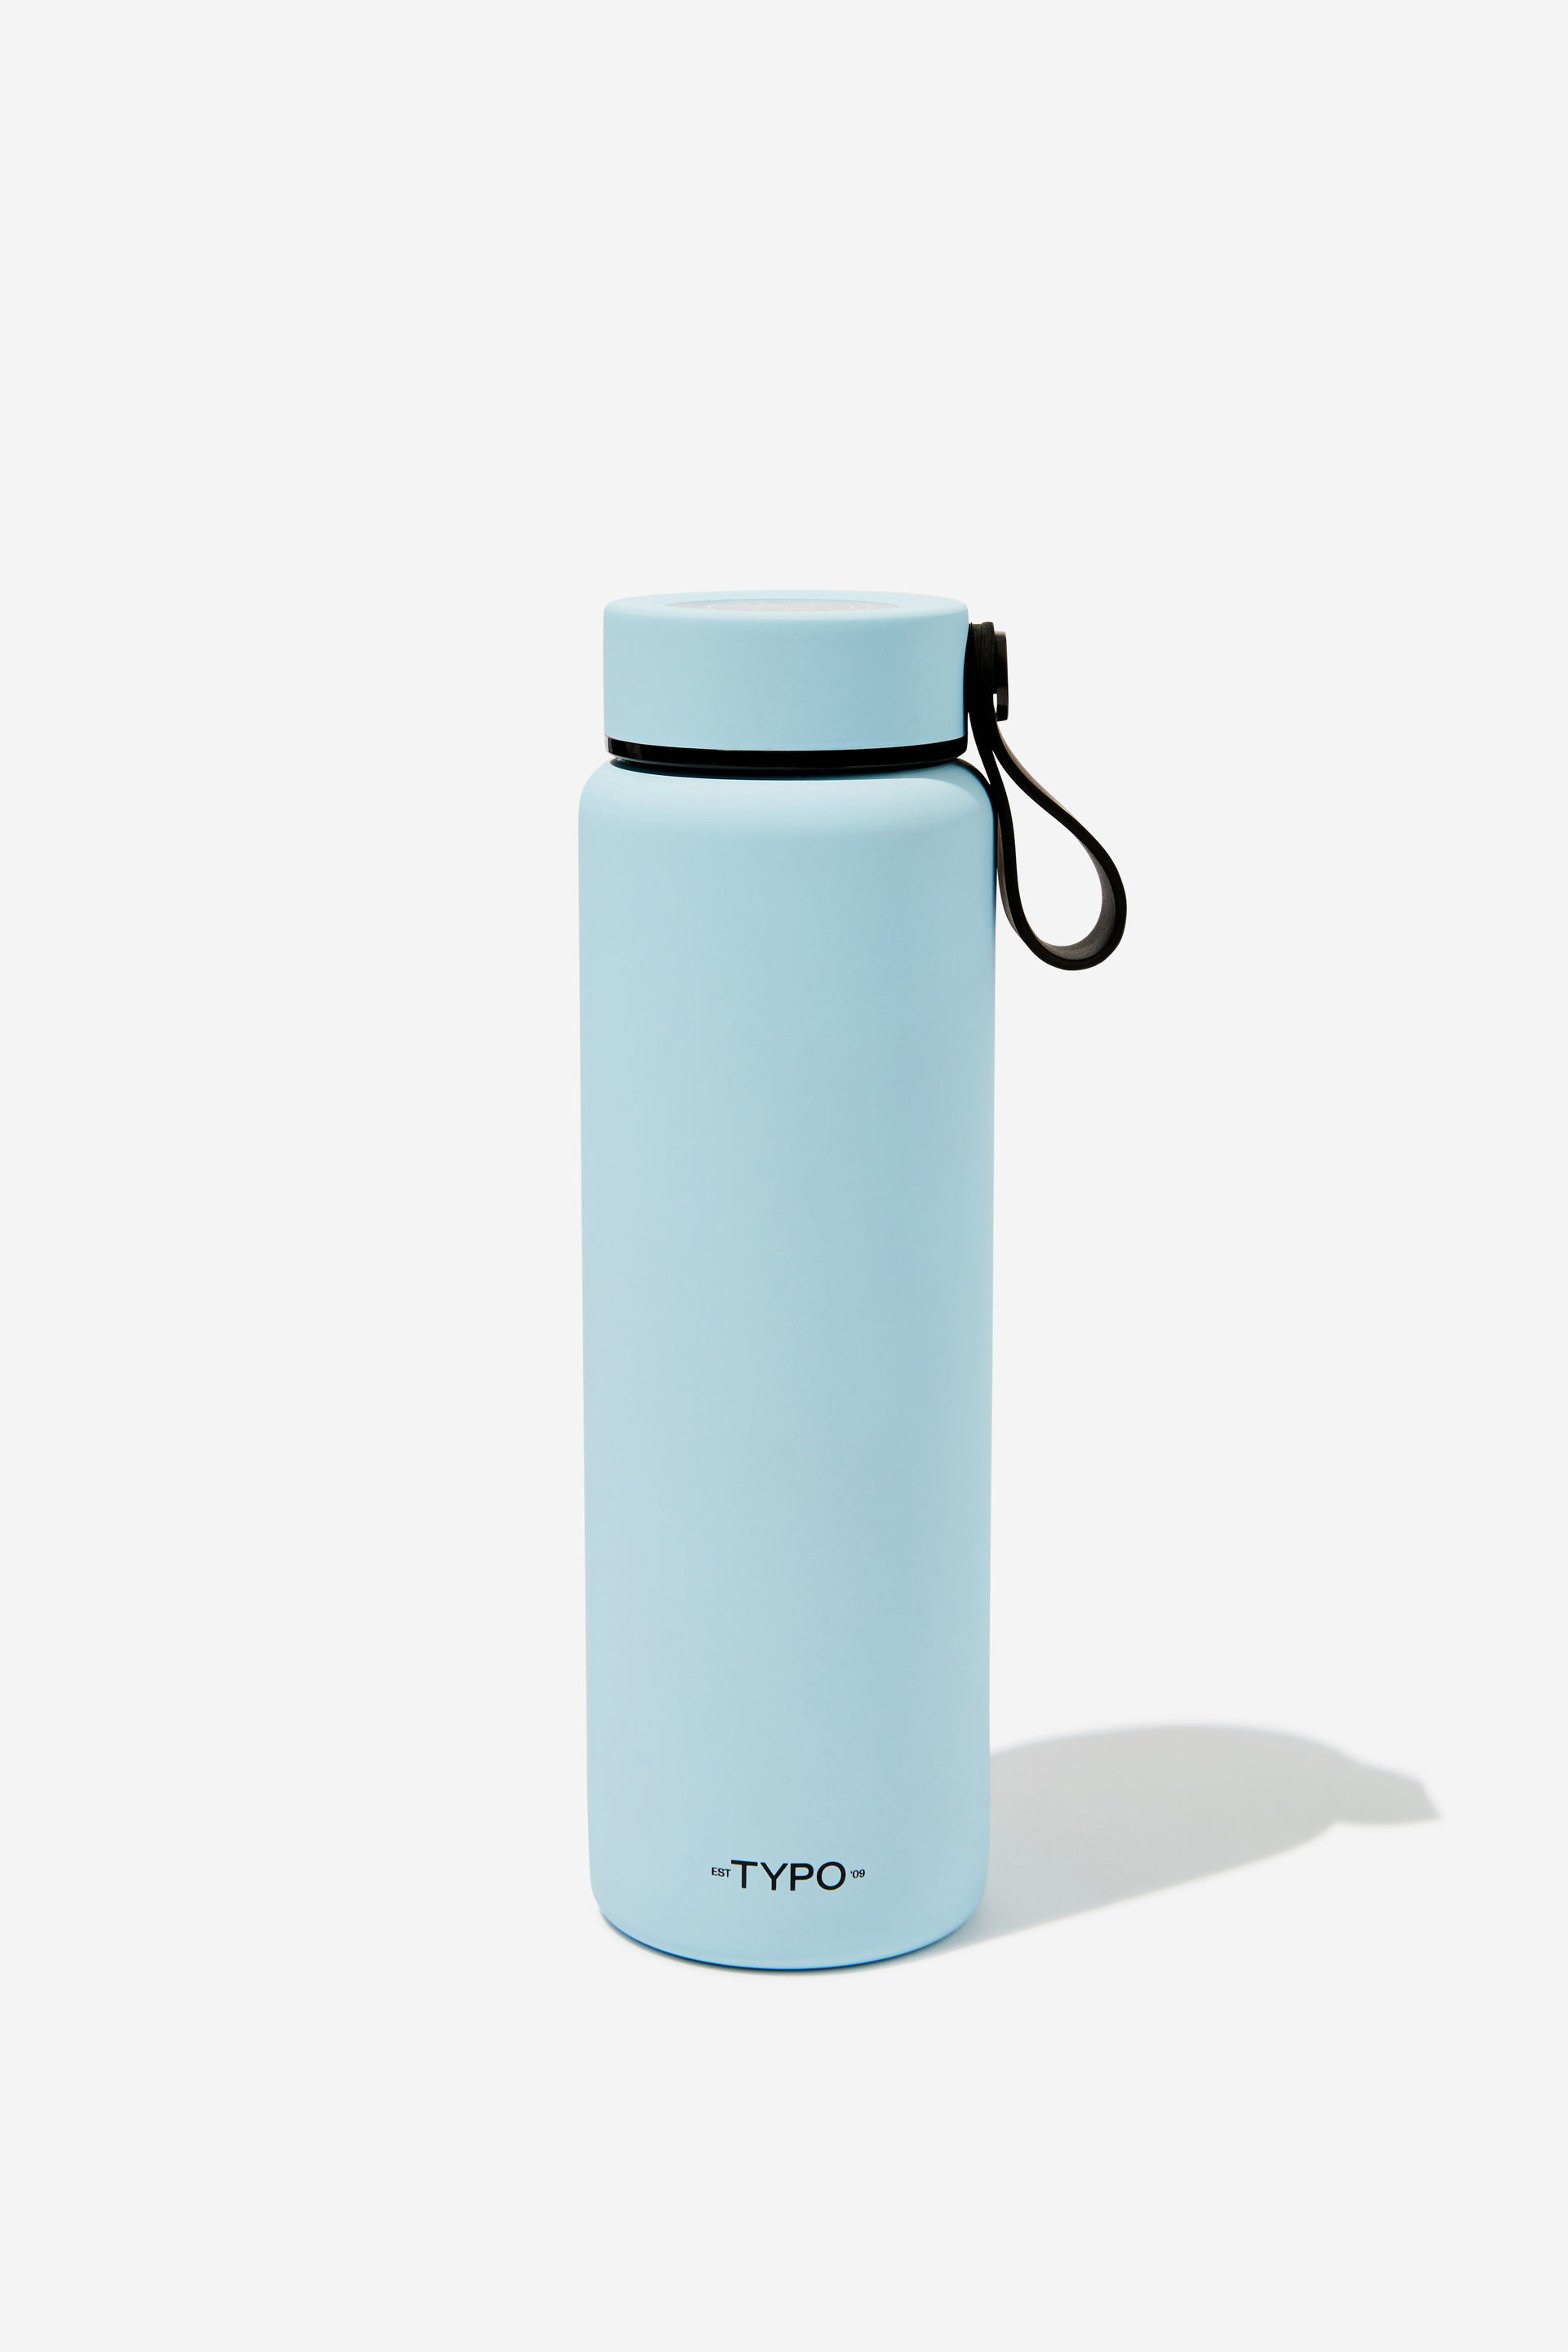 Typo - On The Move 500Ml Drink Bottle 2.0 - Arctic blue